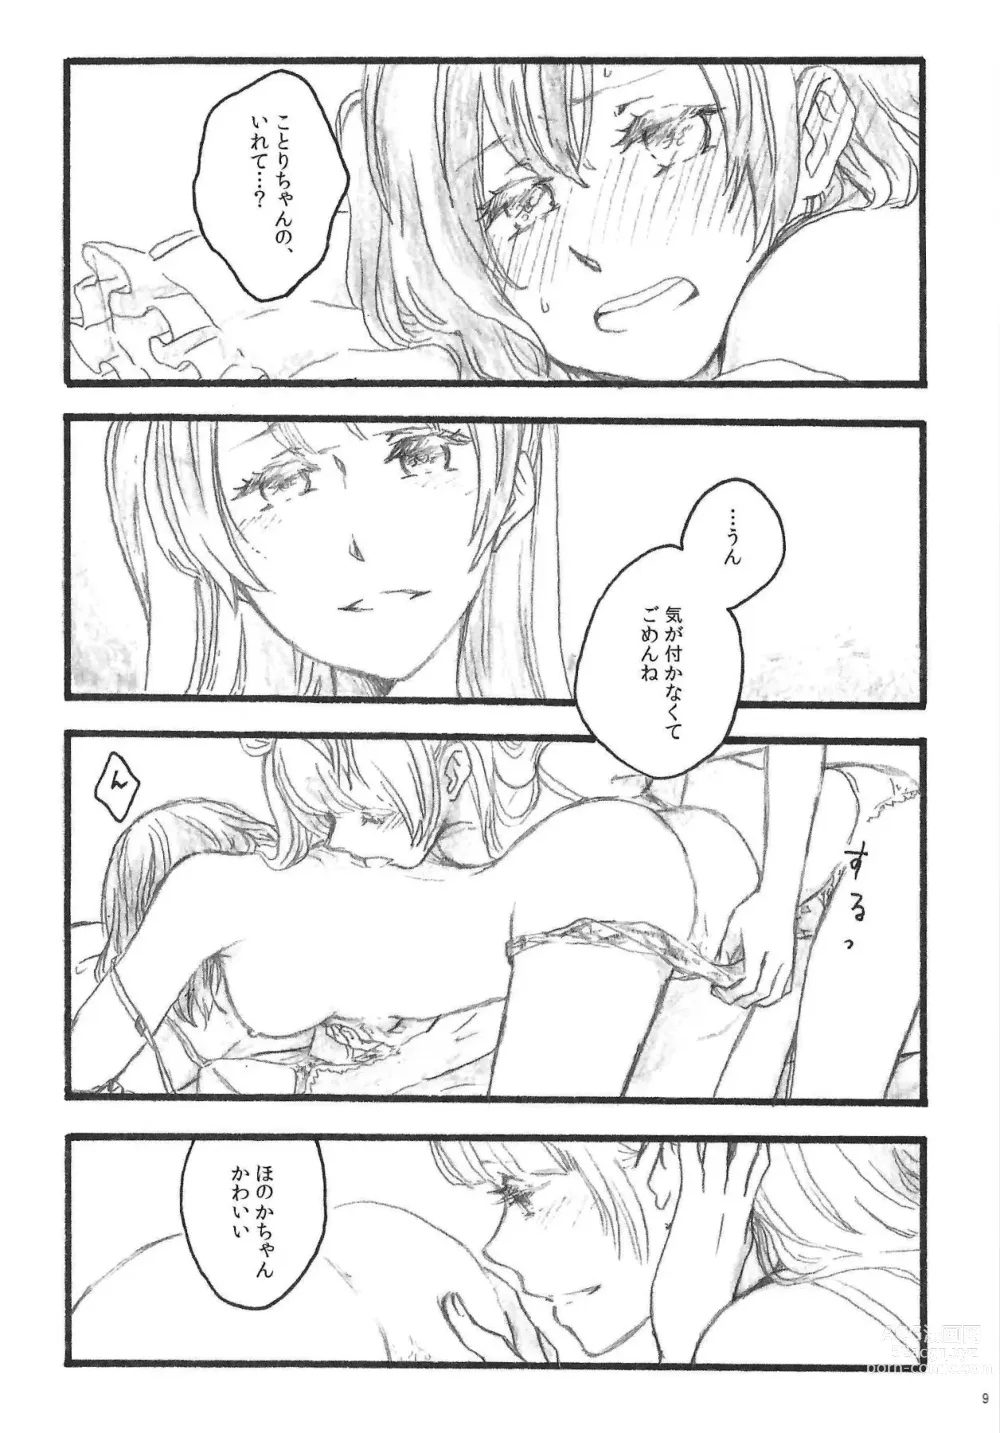 Page 8 of doujinshi a little more